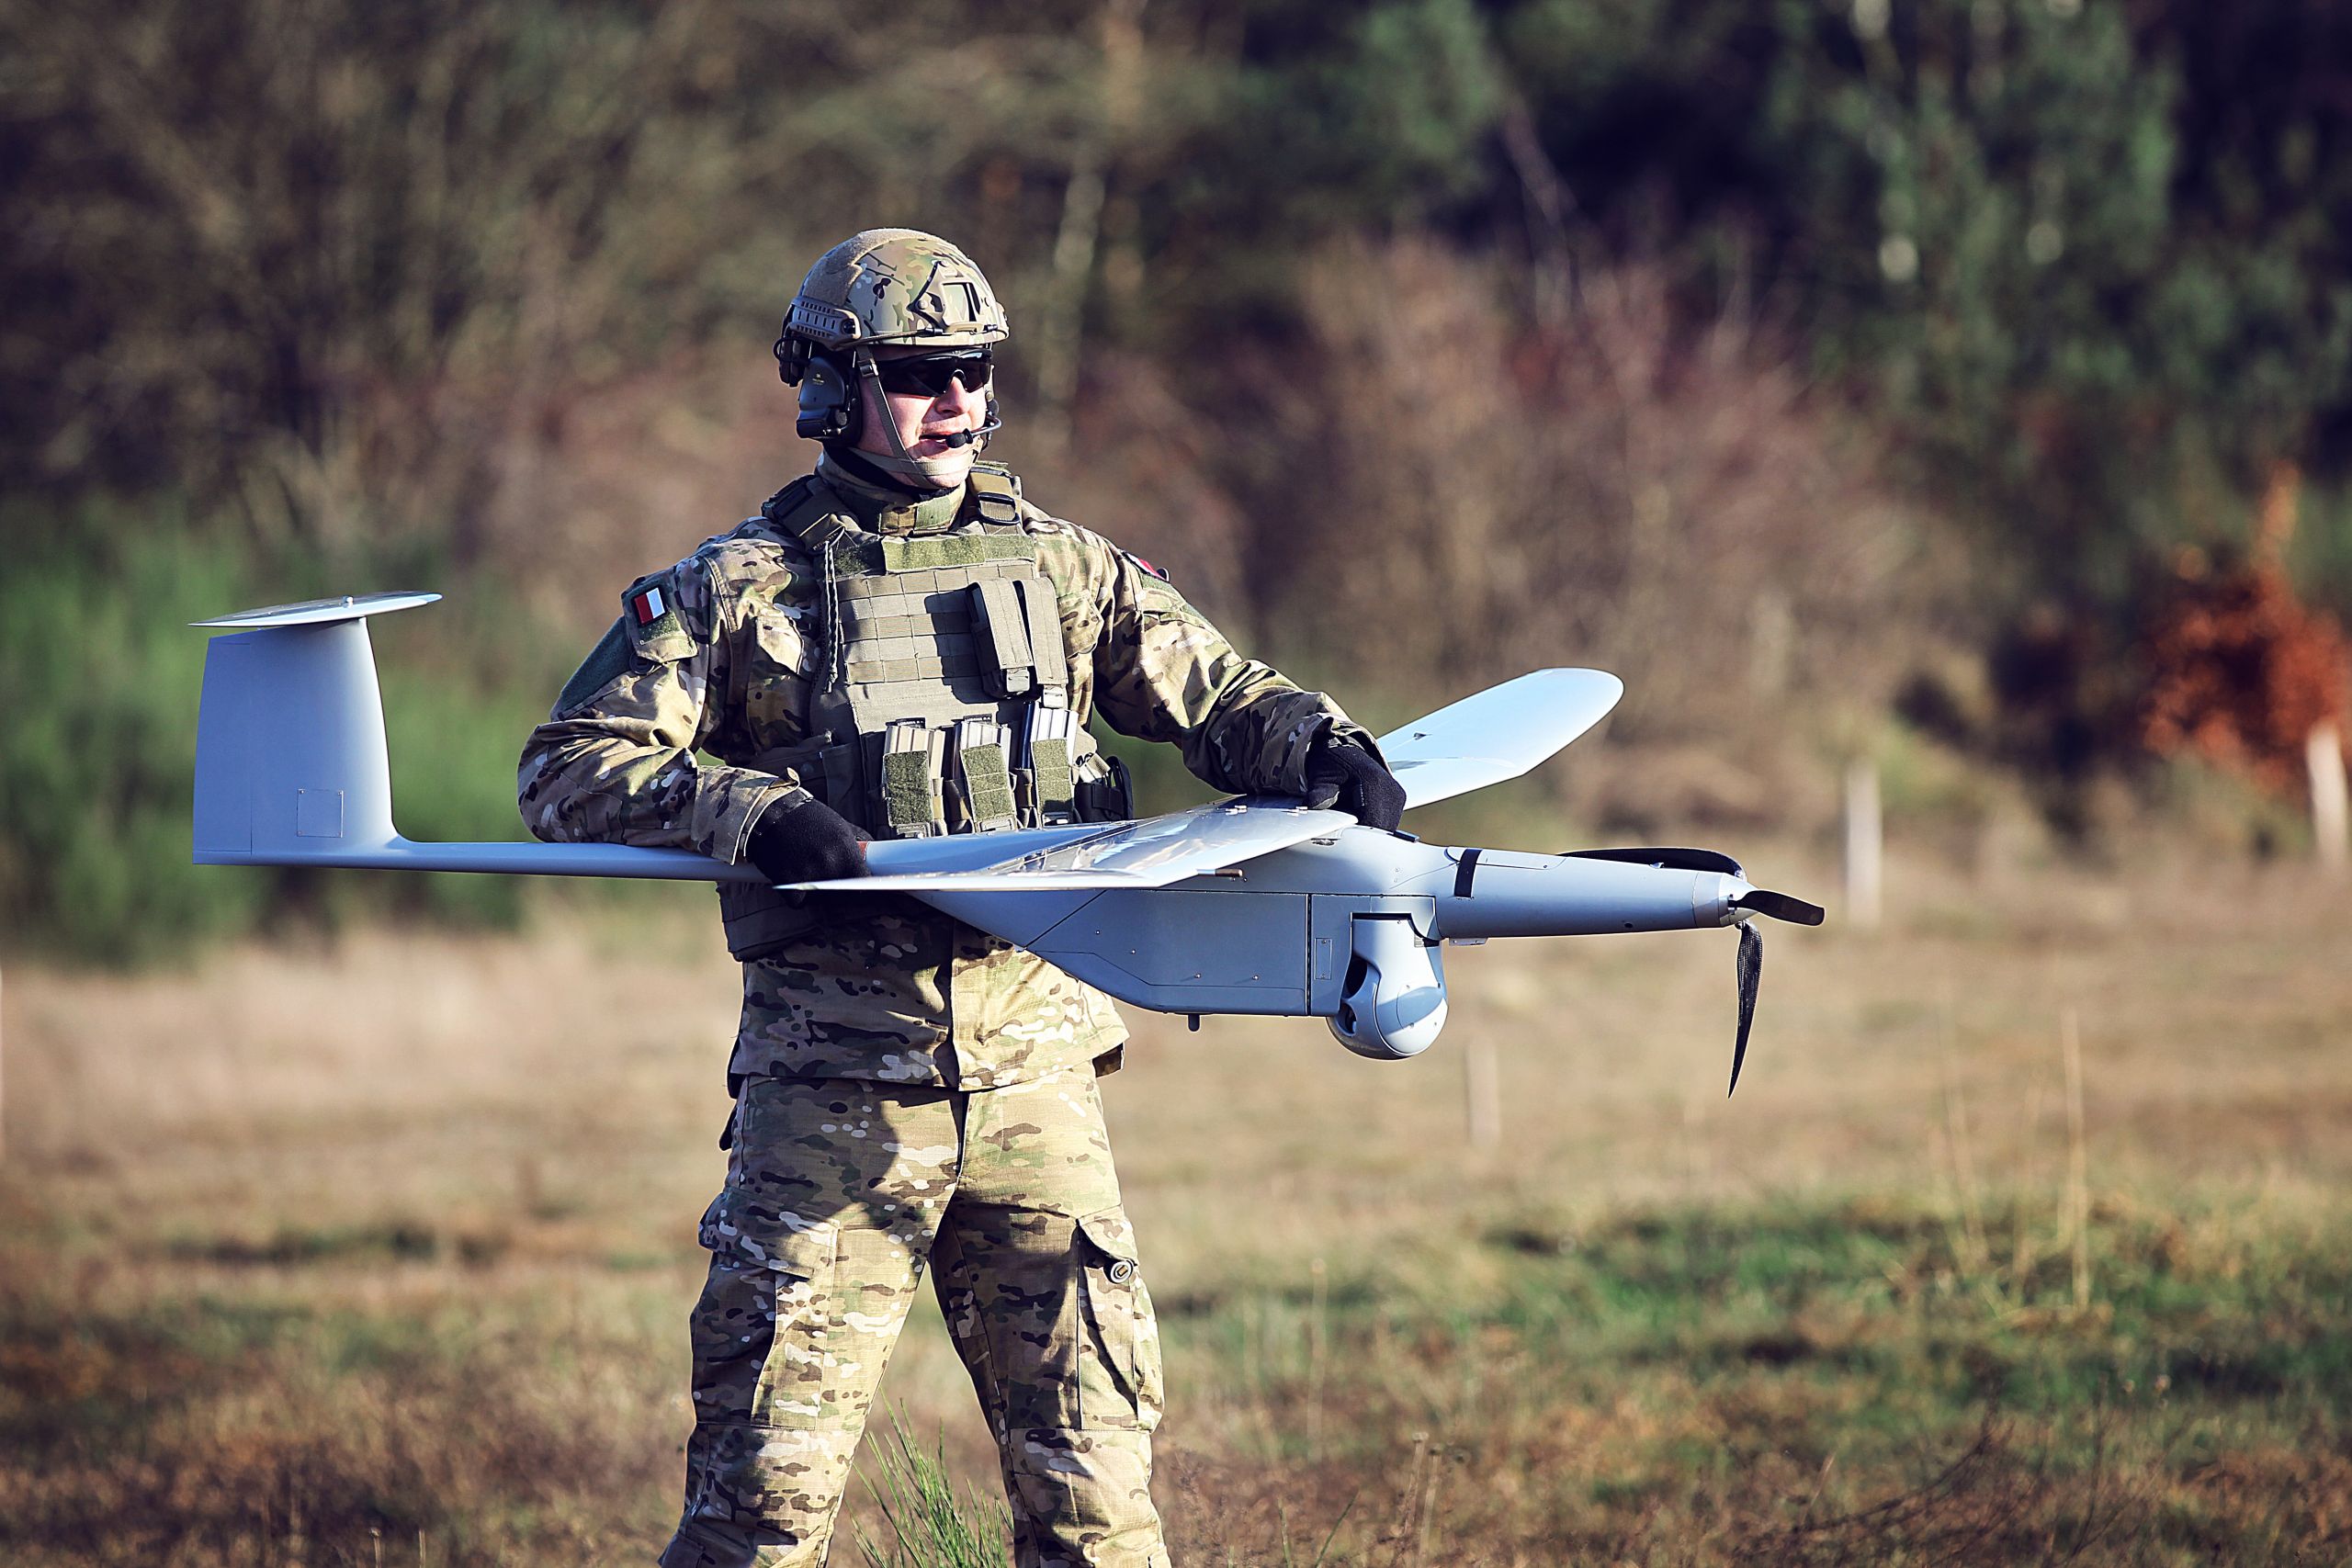 A uniformed soldier holding a WB Group FlyEye unmanned aerial vehicle in a grassy area with trees and shrubbery in the back. The white lightweight drone has a shape similar to high wing aircraft, with its wings attached on top of its body.